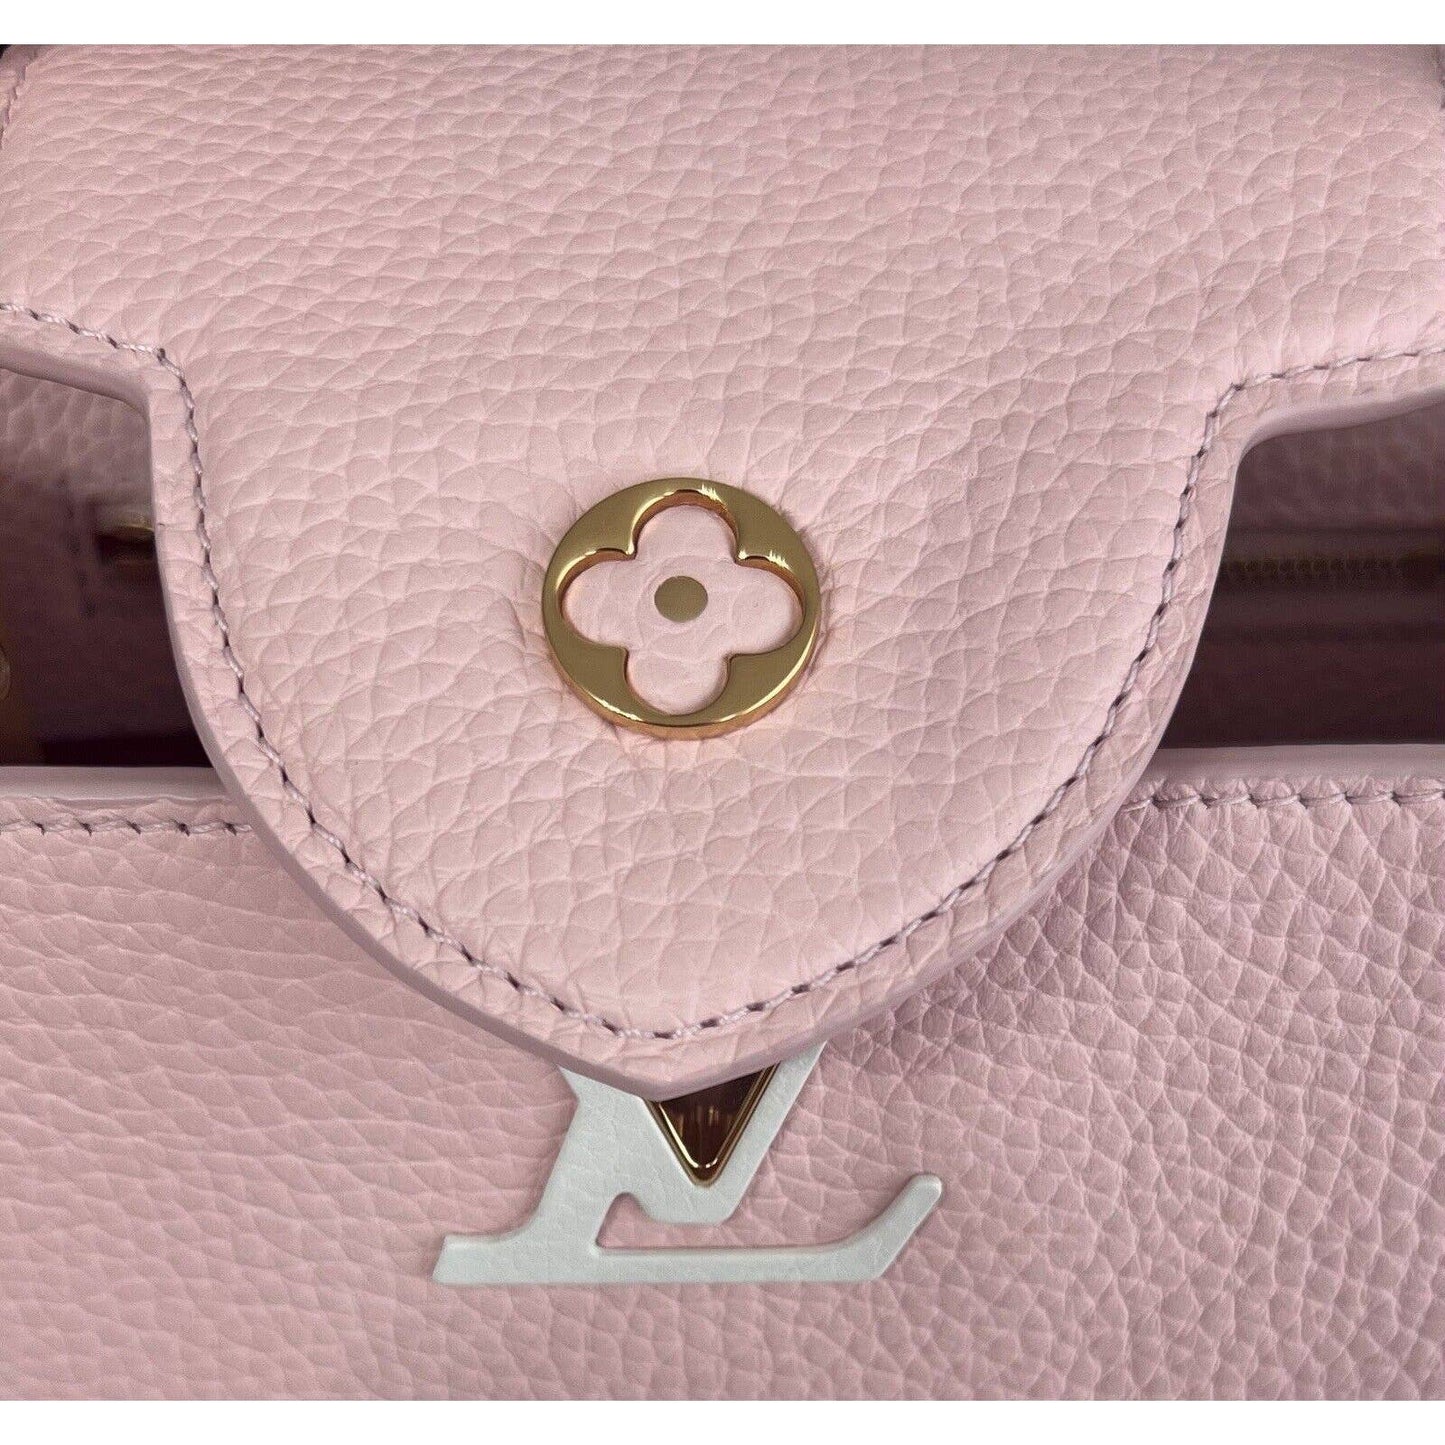 New Limited Edition Louis VUITTON Capucines pm Pink Leather Hand Shoulder Bag